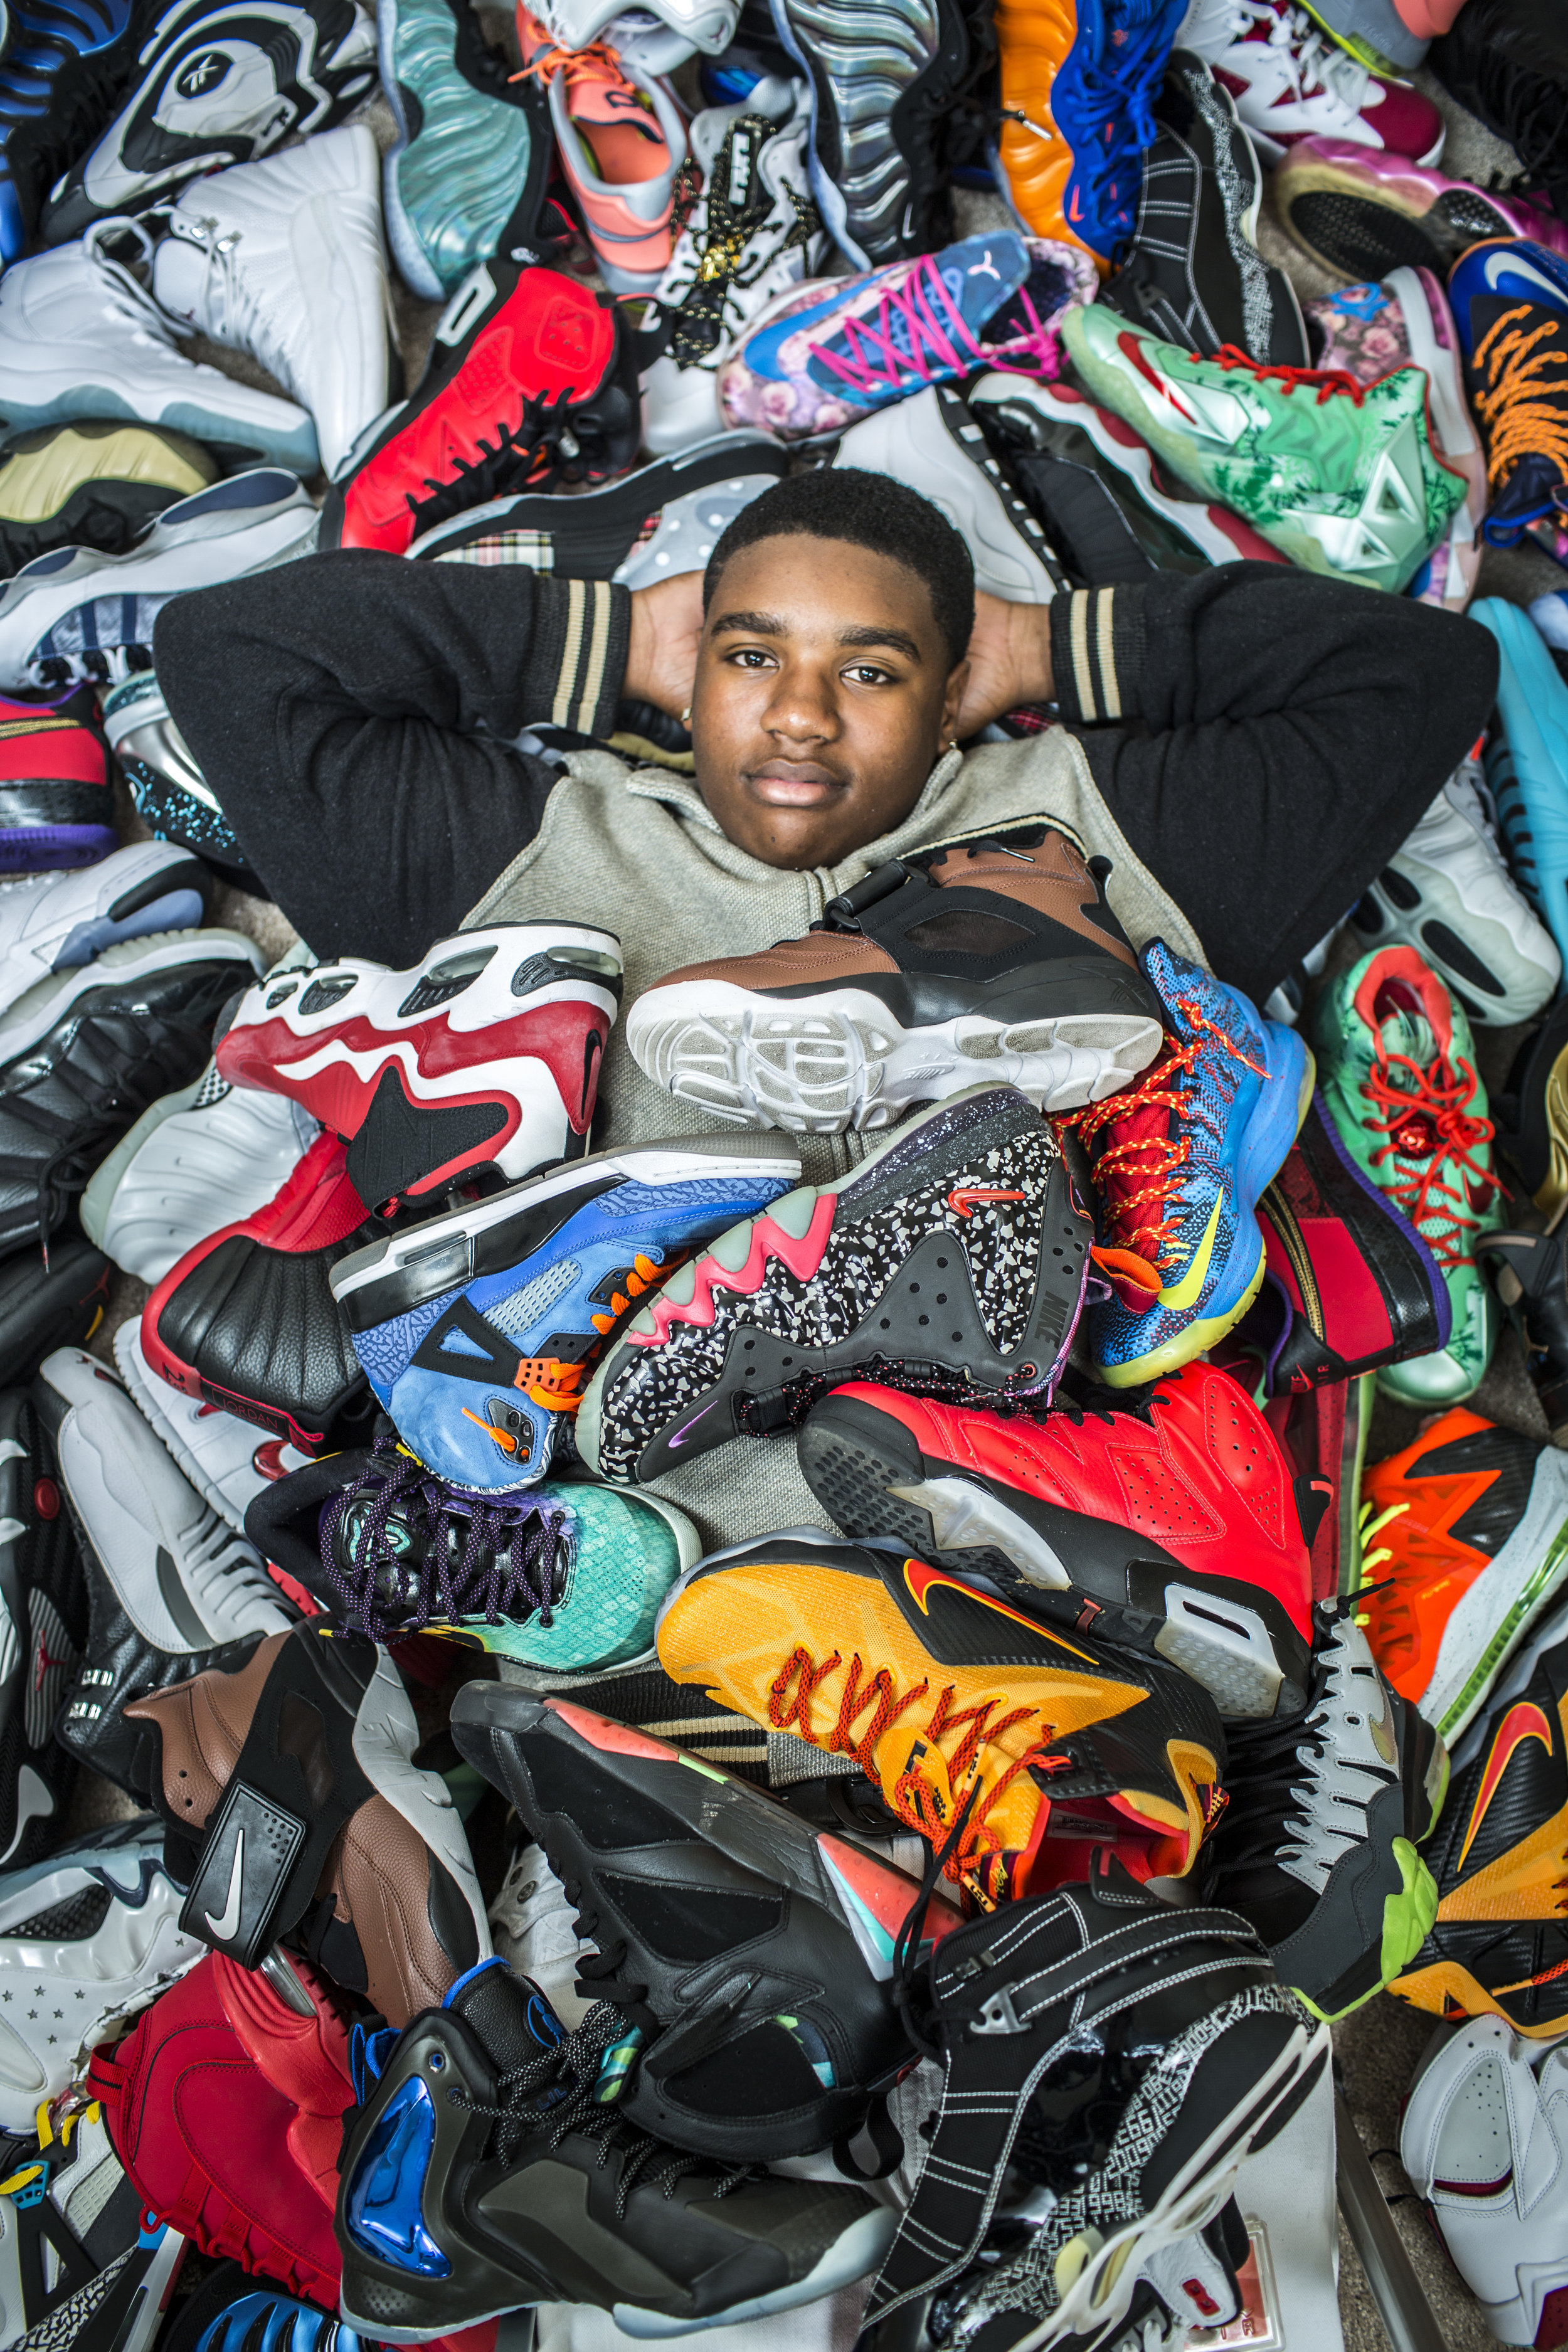  Sneakerhead Alonzo A. Moore, Jr. and just a portion of his sneaker collection, Thursday, Dec. 15, 2016 in Antioch, CA. 